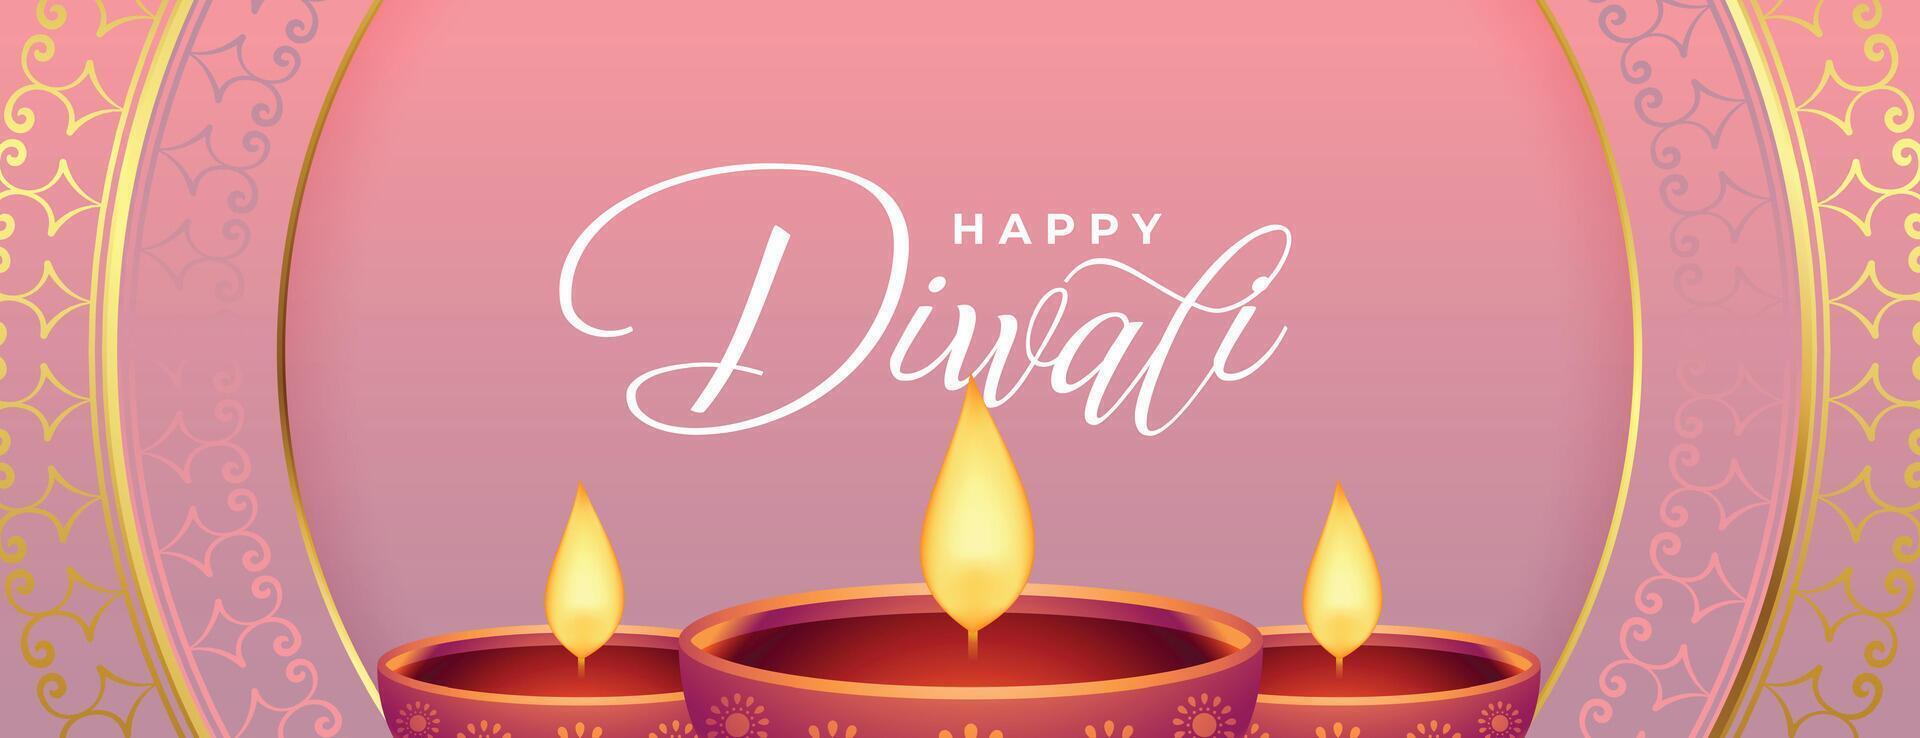 beautiful shubh diwali event banner with oil lamp design vector